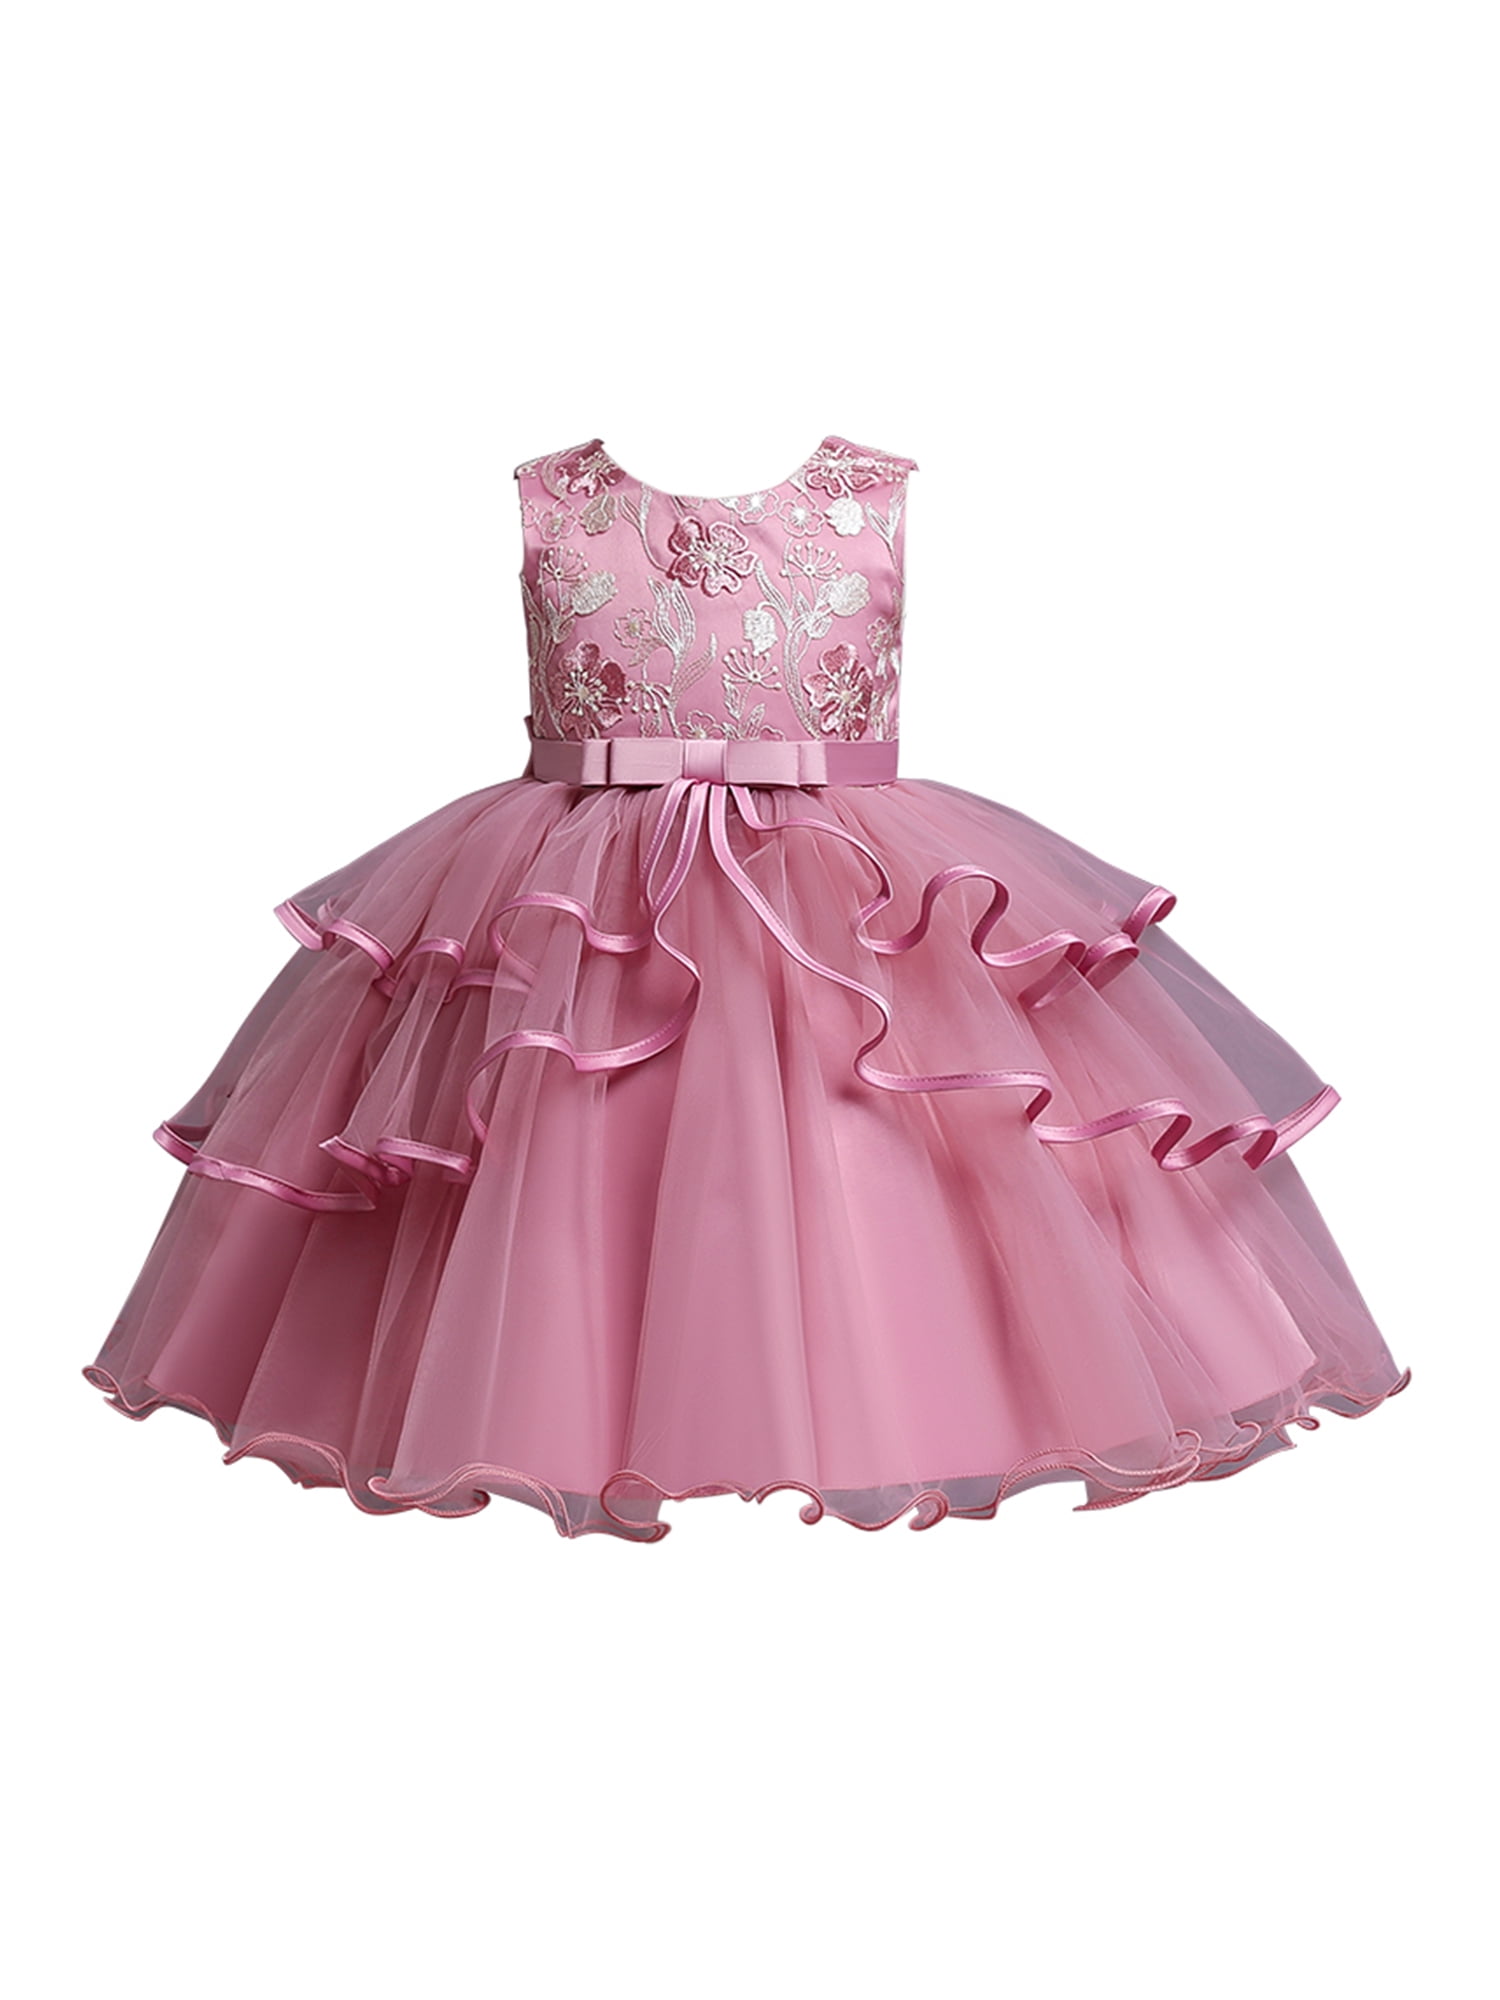 Princess Baby Girl Party Tutu Dress Embroidered Floral Pageant Wedding Birthday 